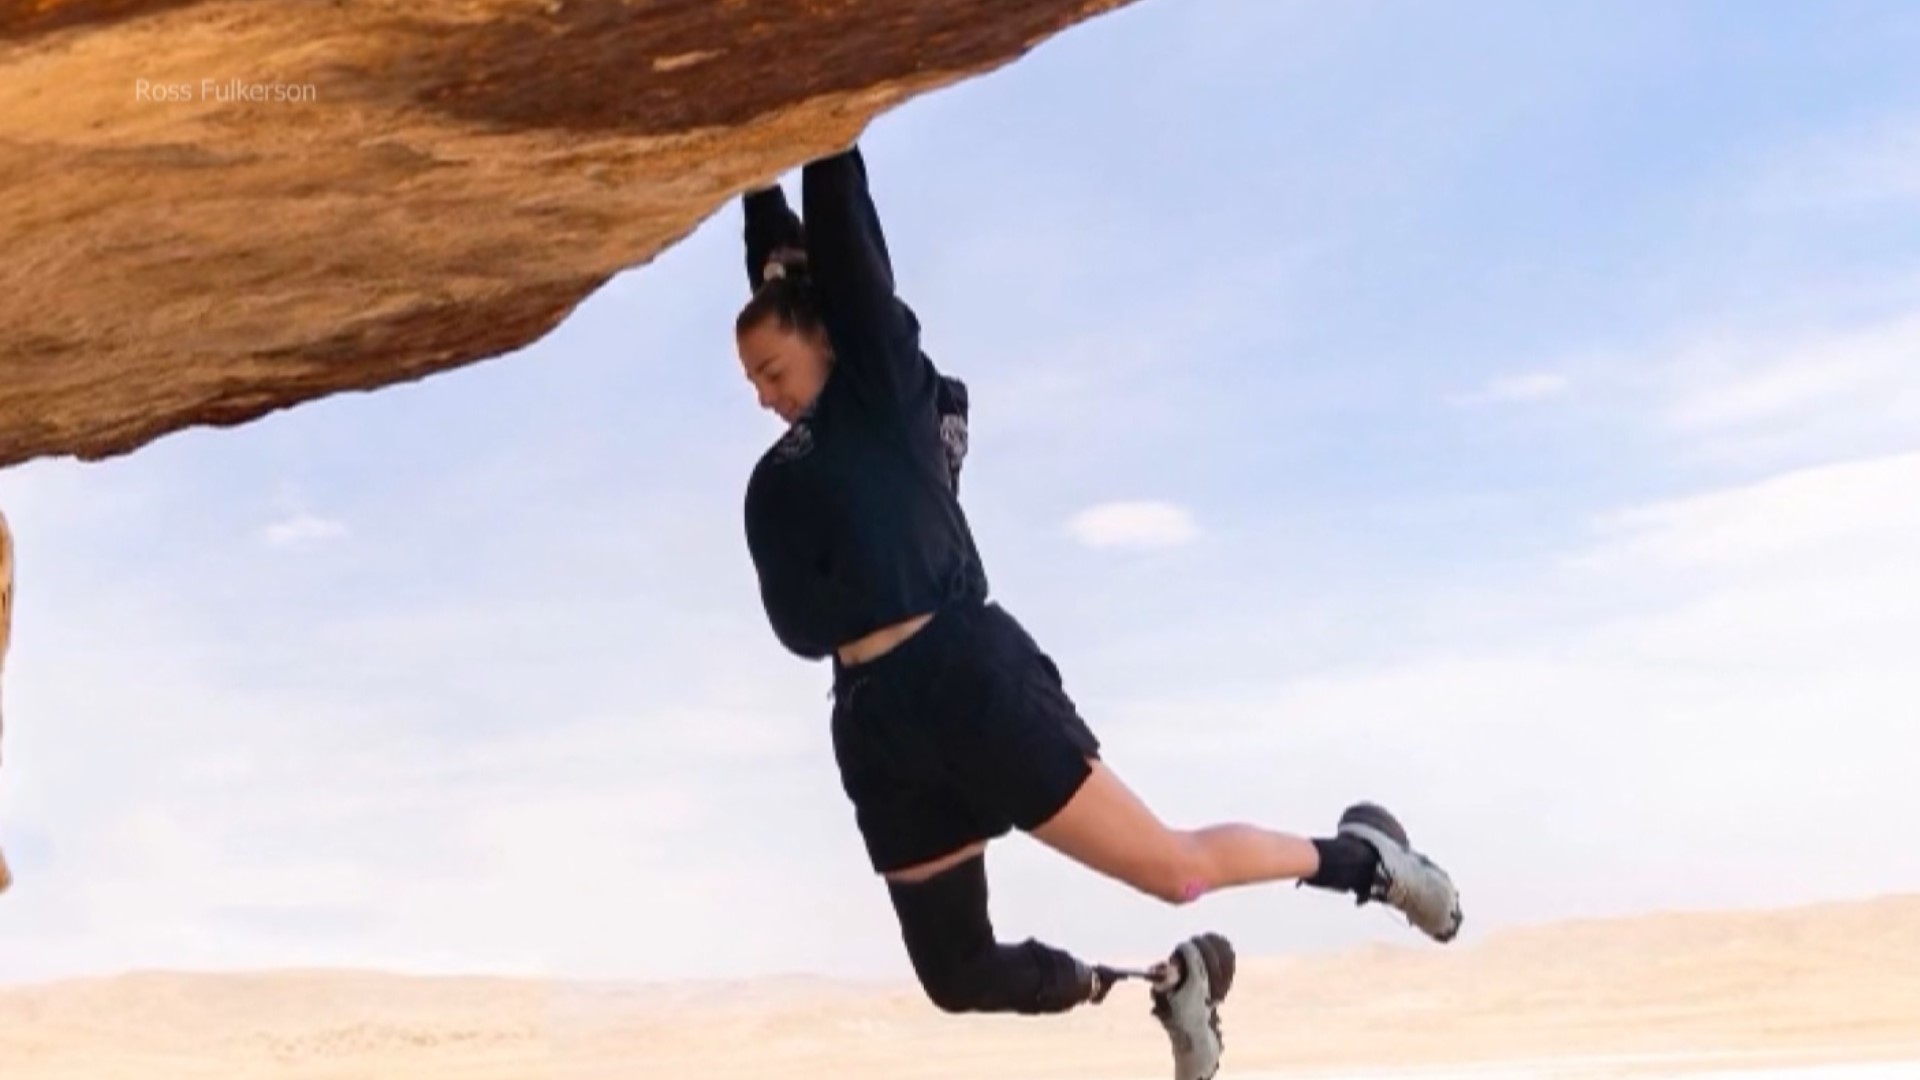 Colorado-based climber Cail Soria earned an invite to the World Paraclimbing Championships as a member of the US Para Climbing team, after only one year in the sport